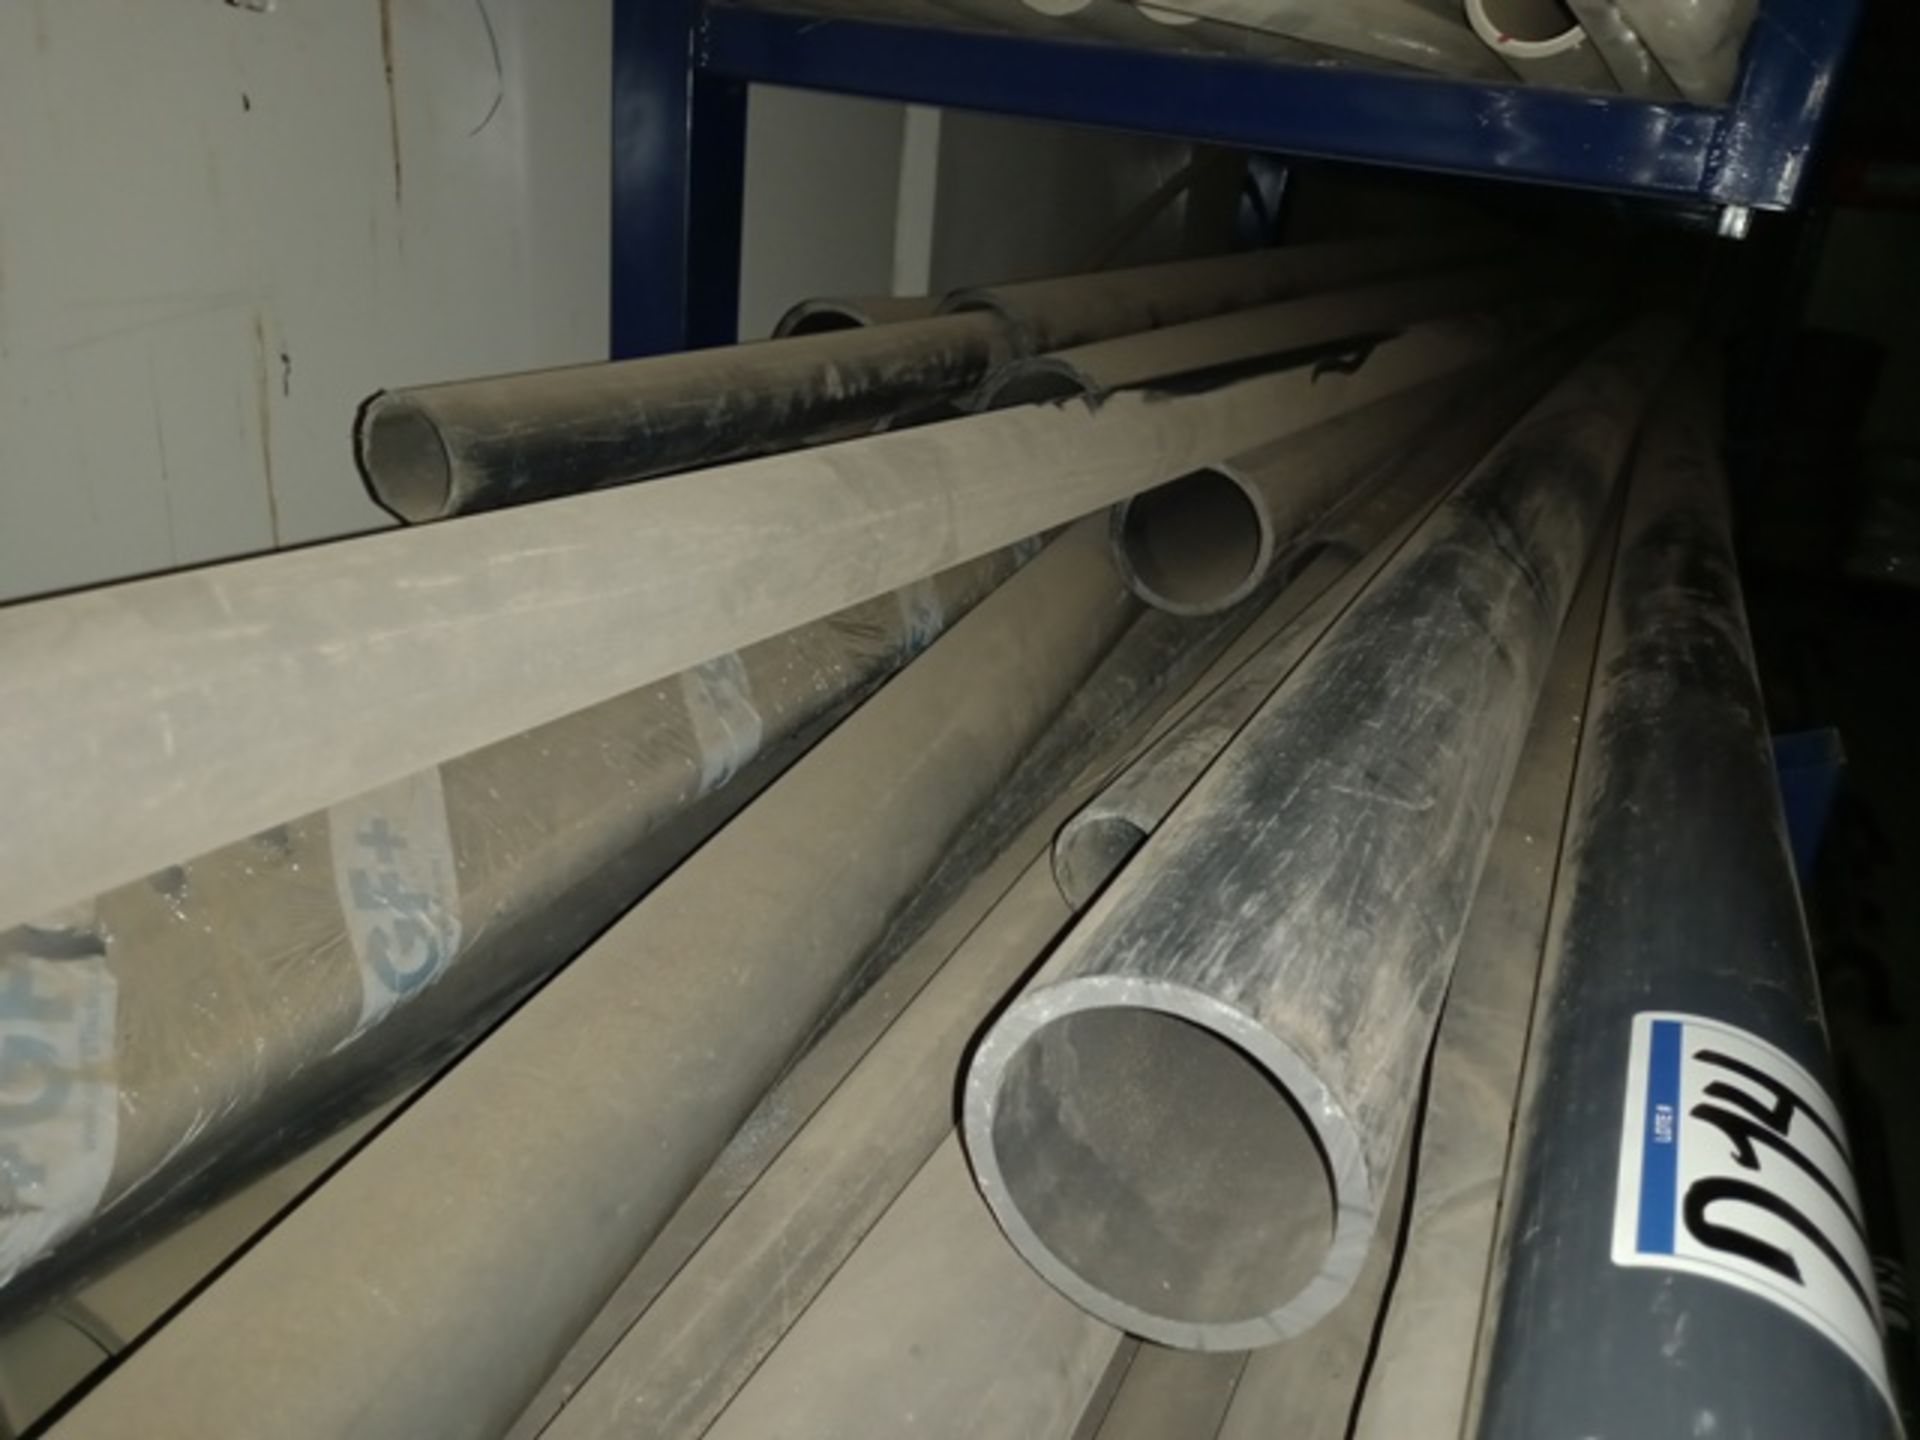 Lot of (1) Metallic Rack with Hydraulic PVC Pipe, Different Sizes (1" - 4") - Image 7 of 7